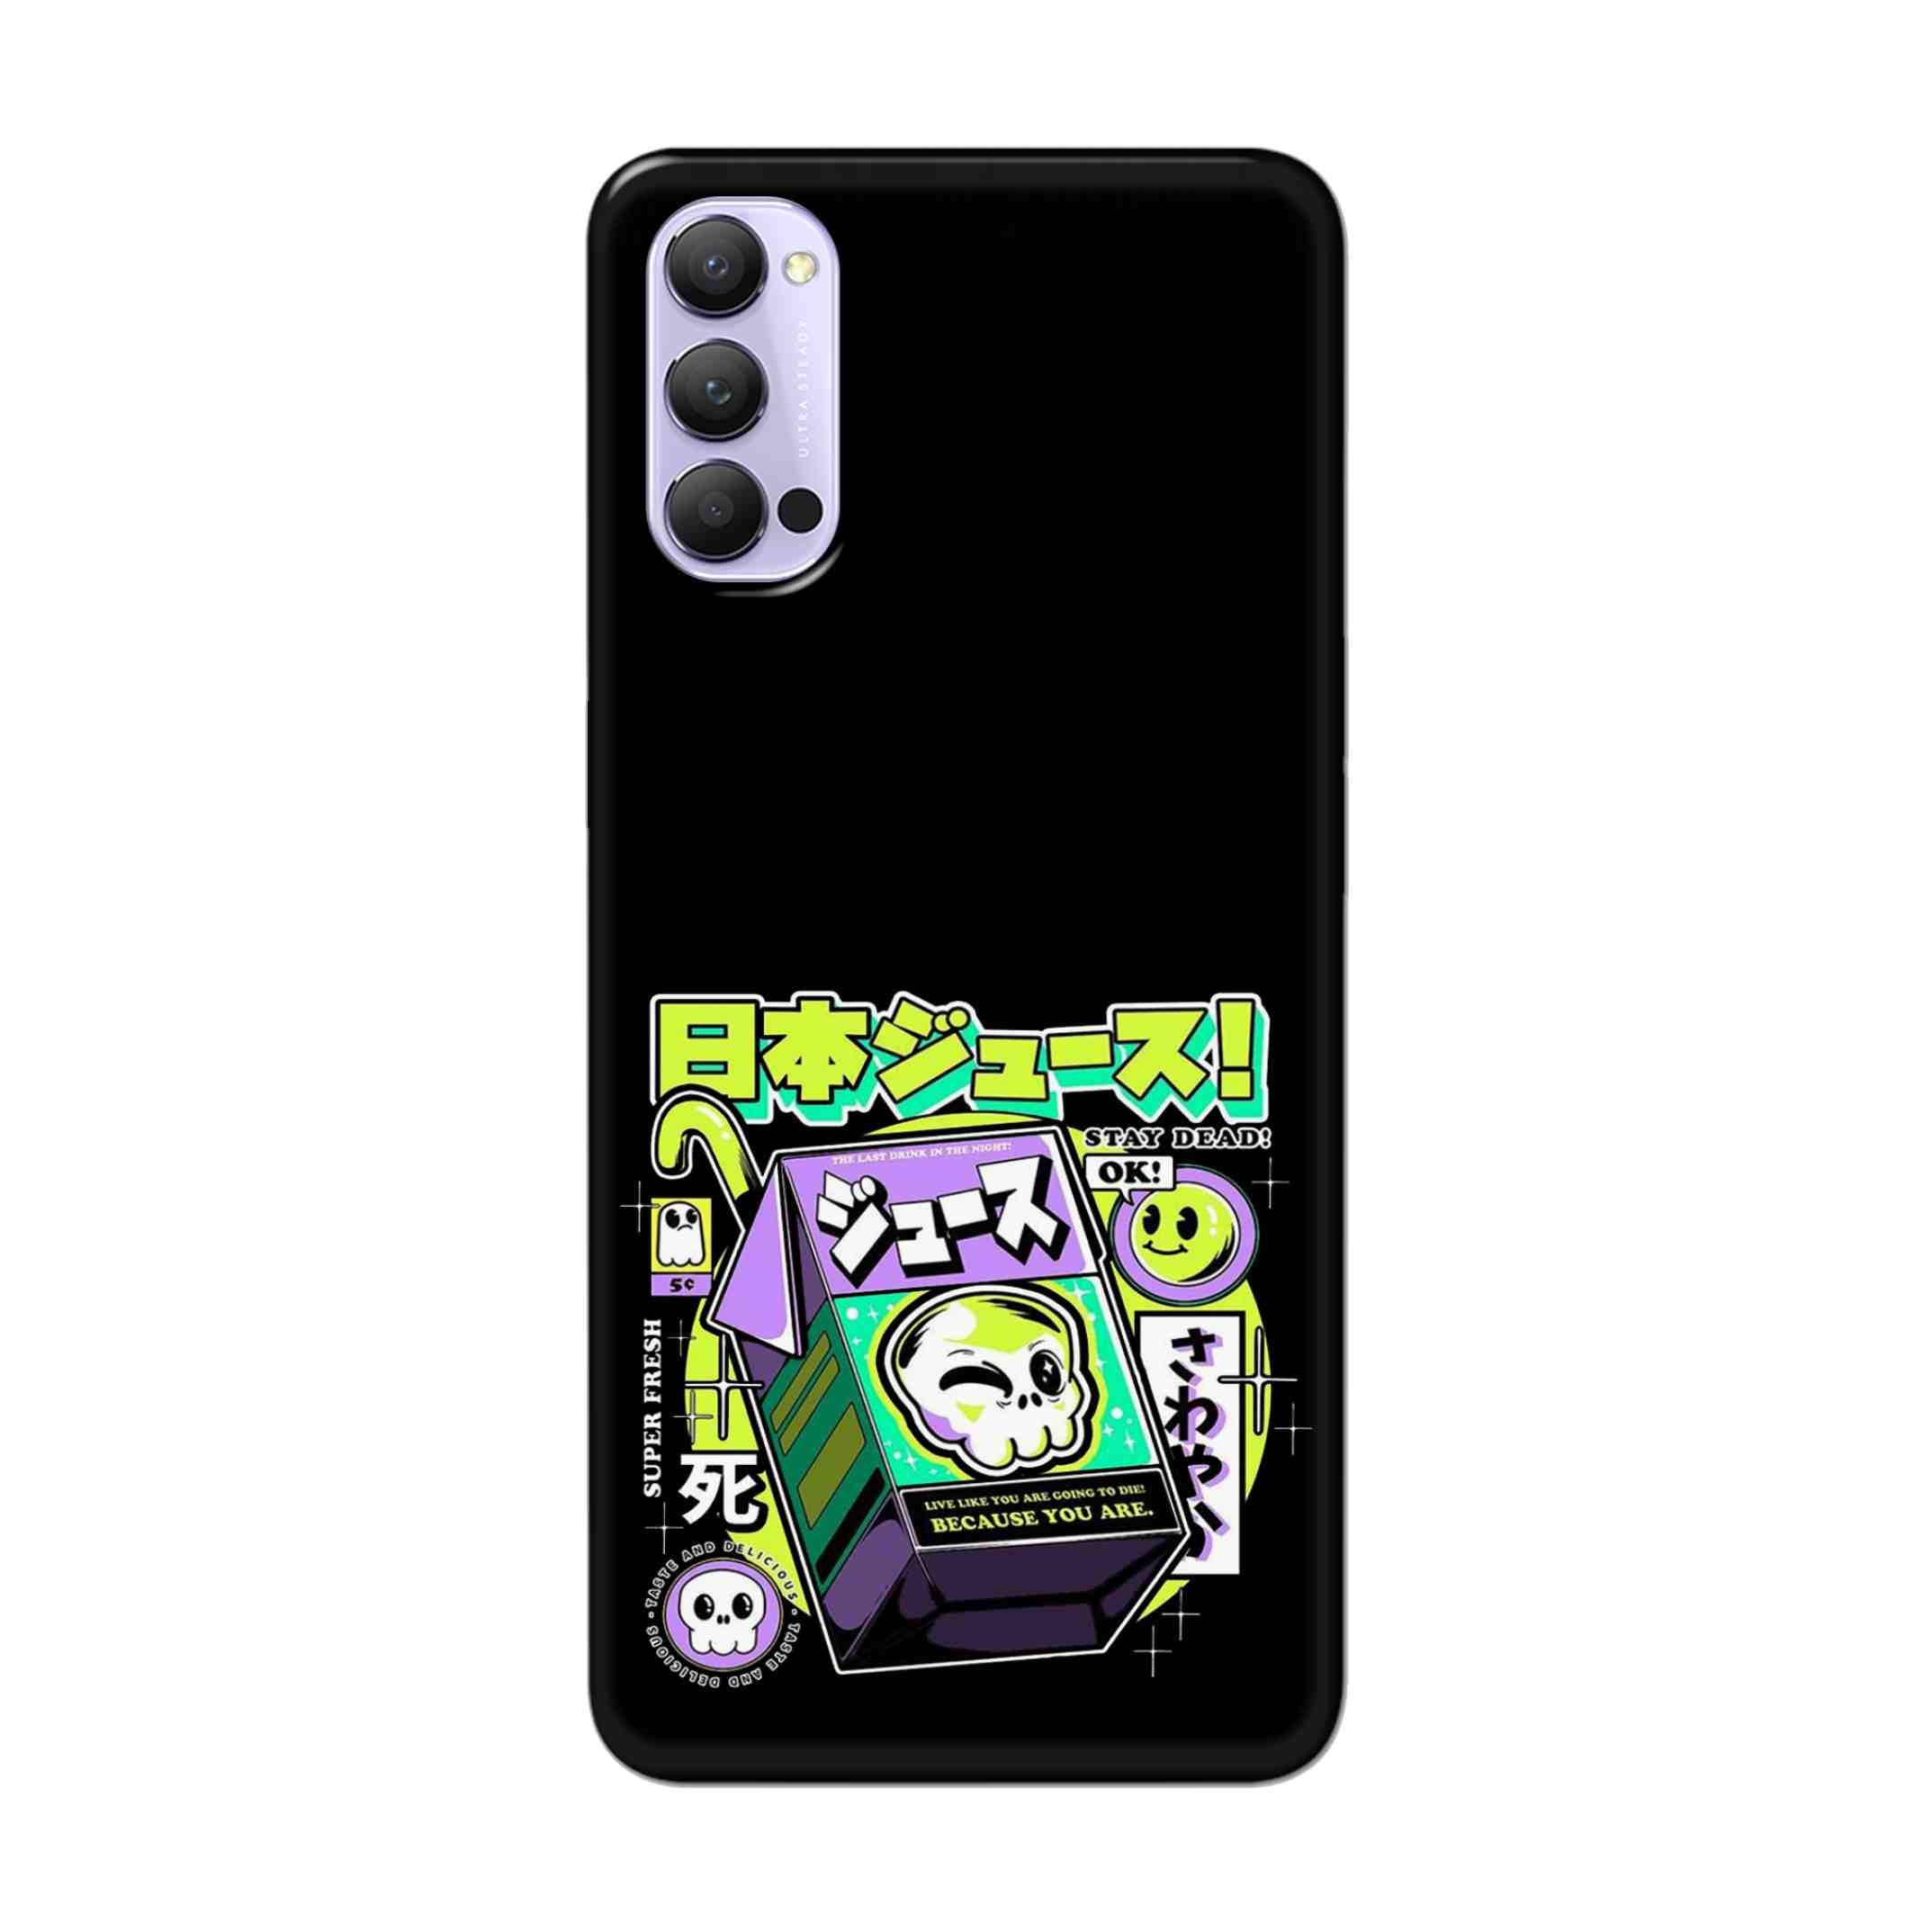 Buy Because You Are Hard Back Mobile Phone Case Cover For Oppo Reno 4 Pro Online